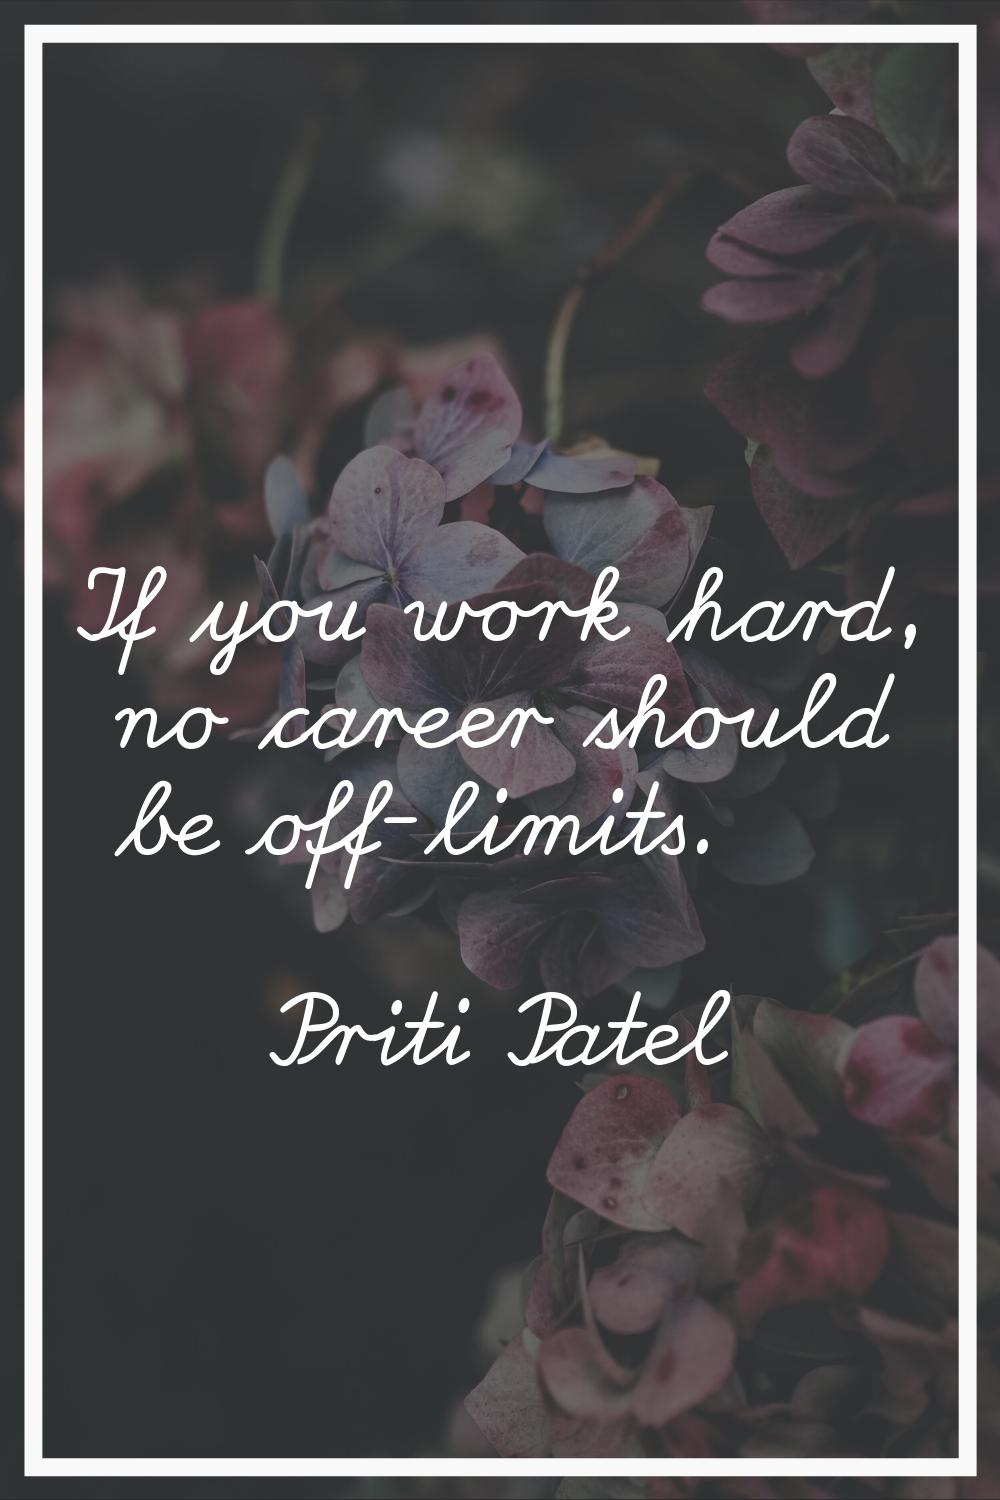 If you work hard, no career should be off-limits.